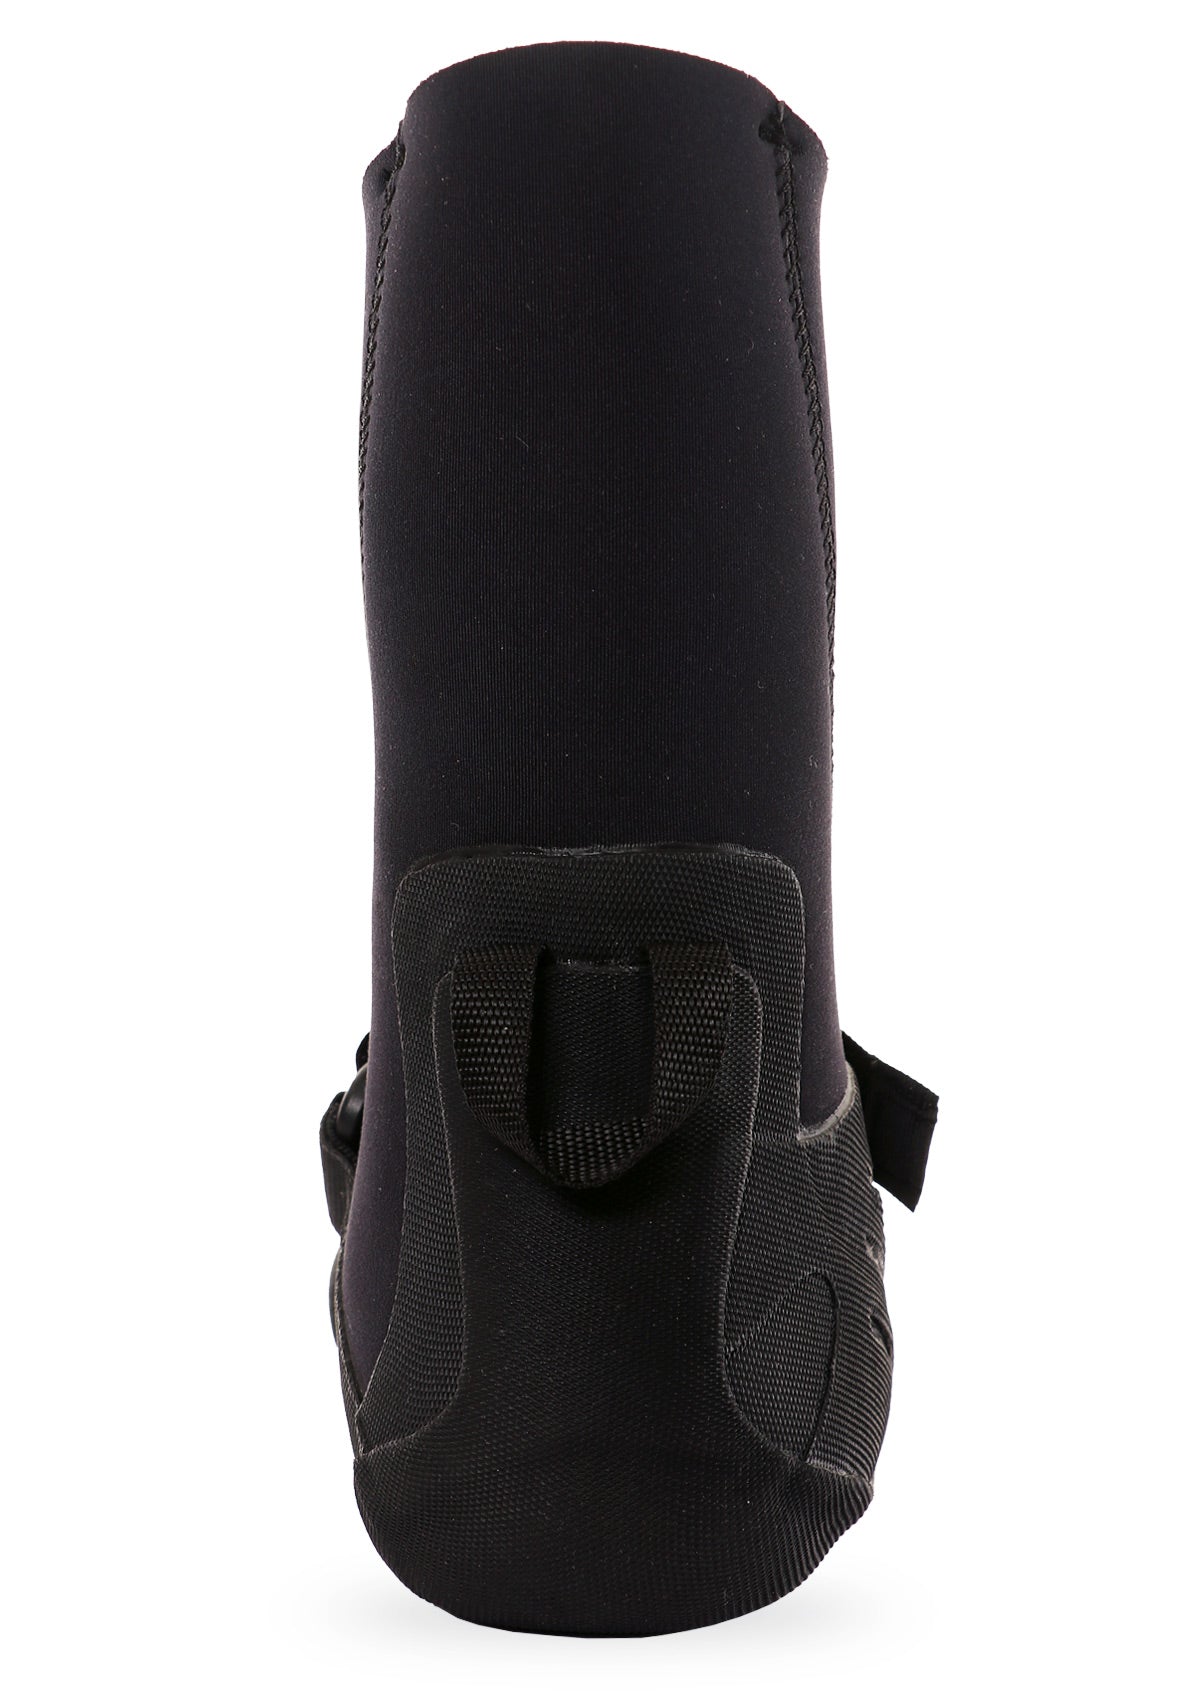 4mm Wetsuit Boot